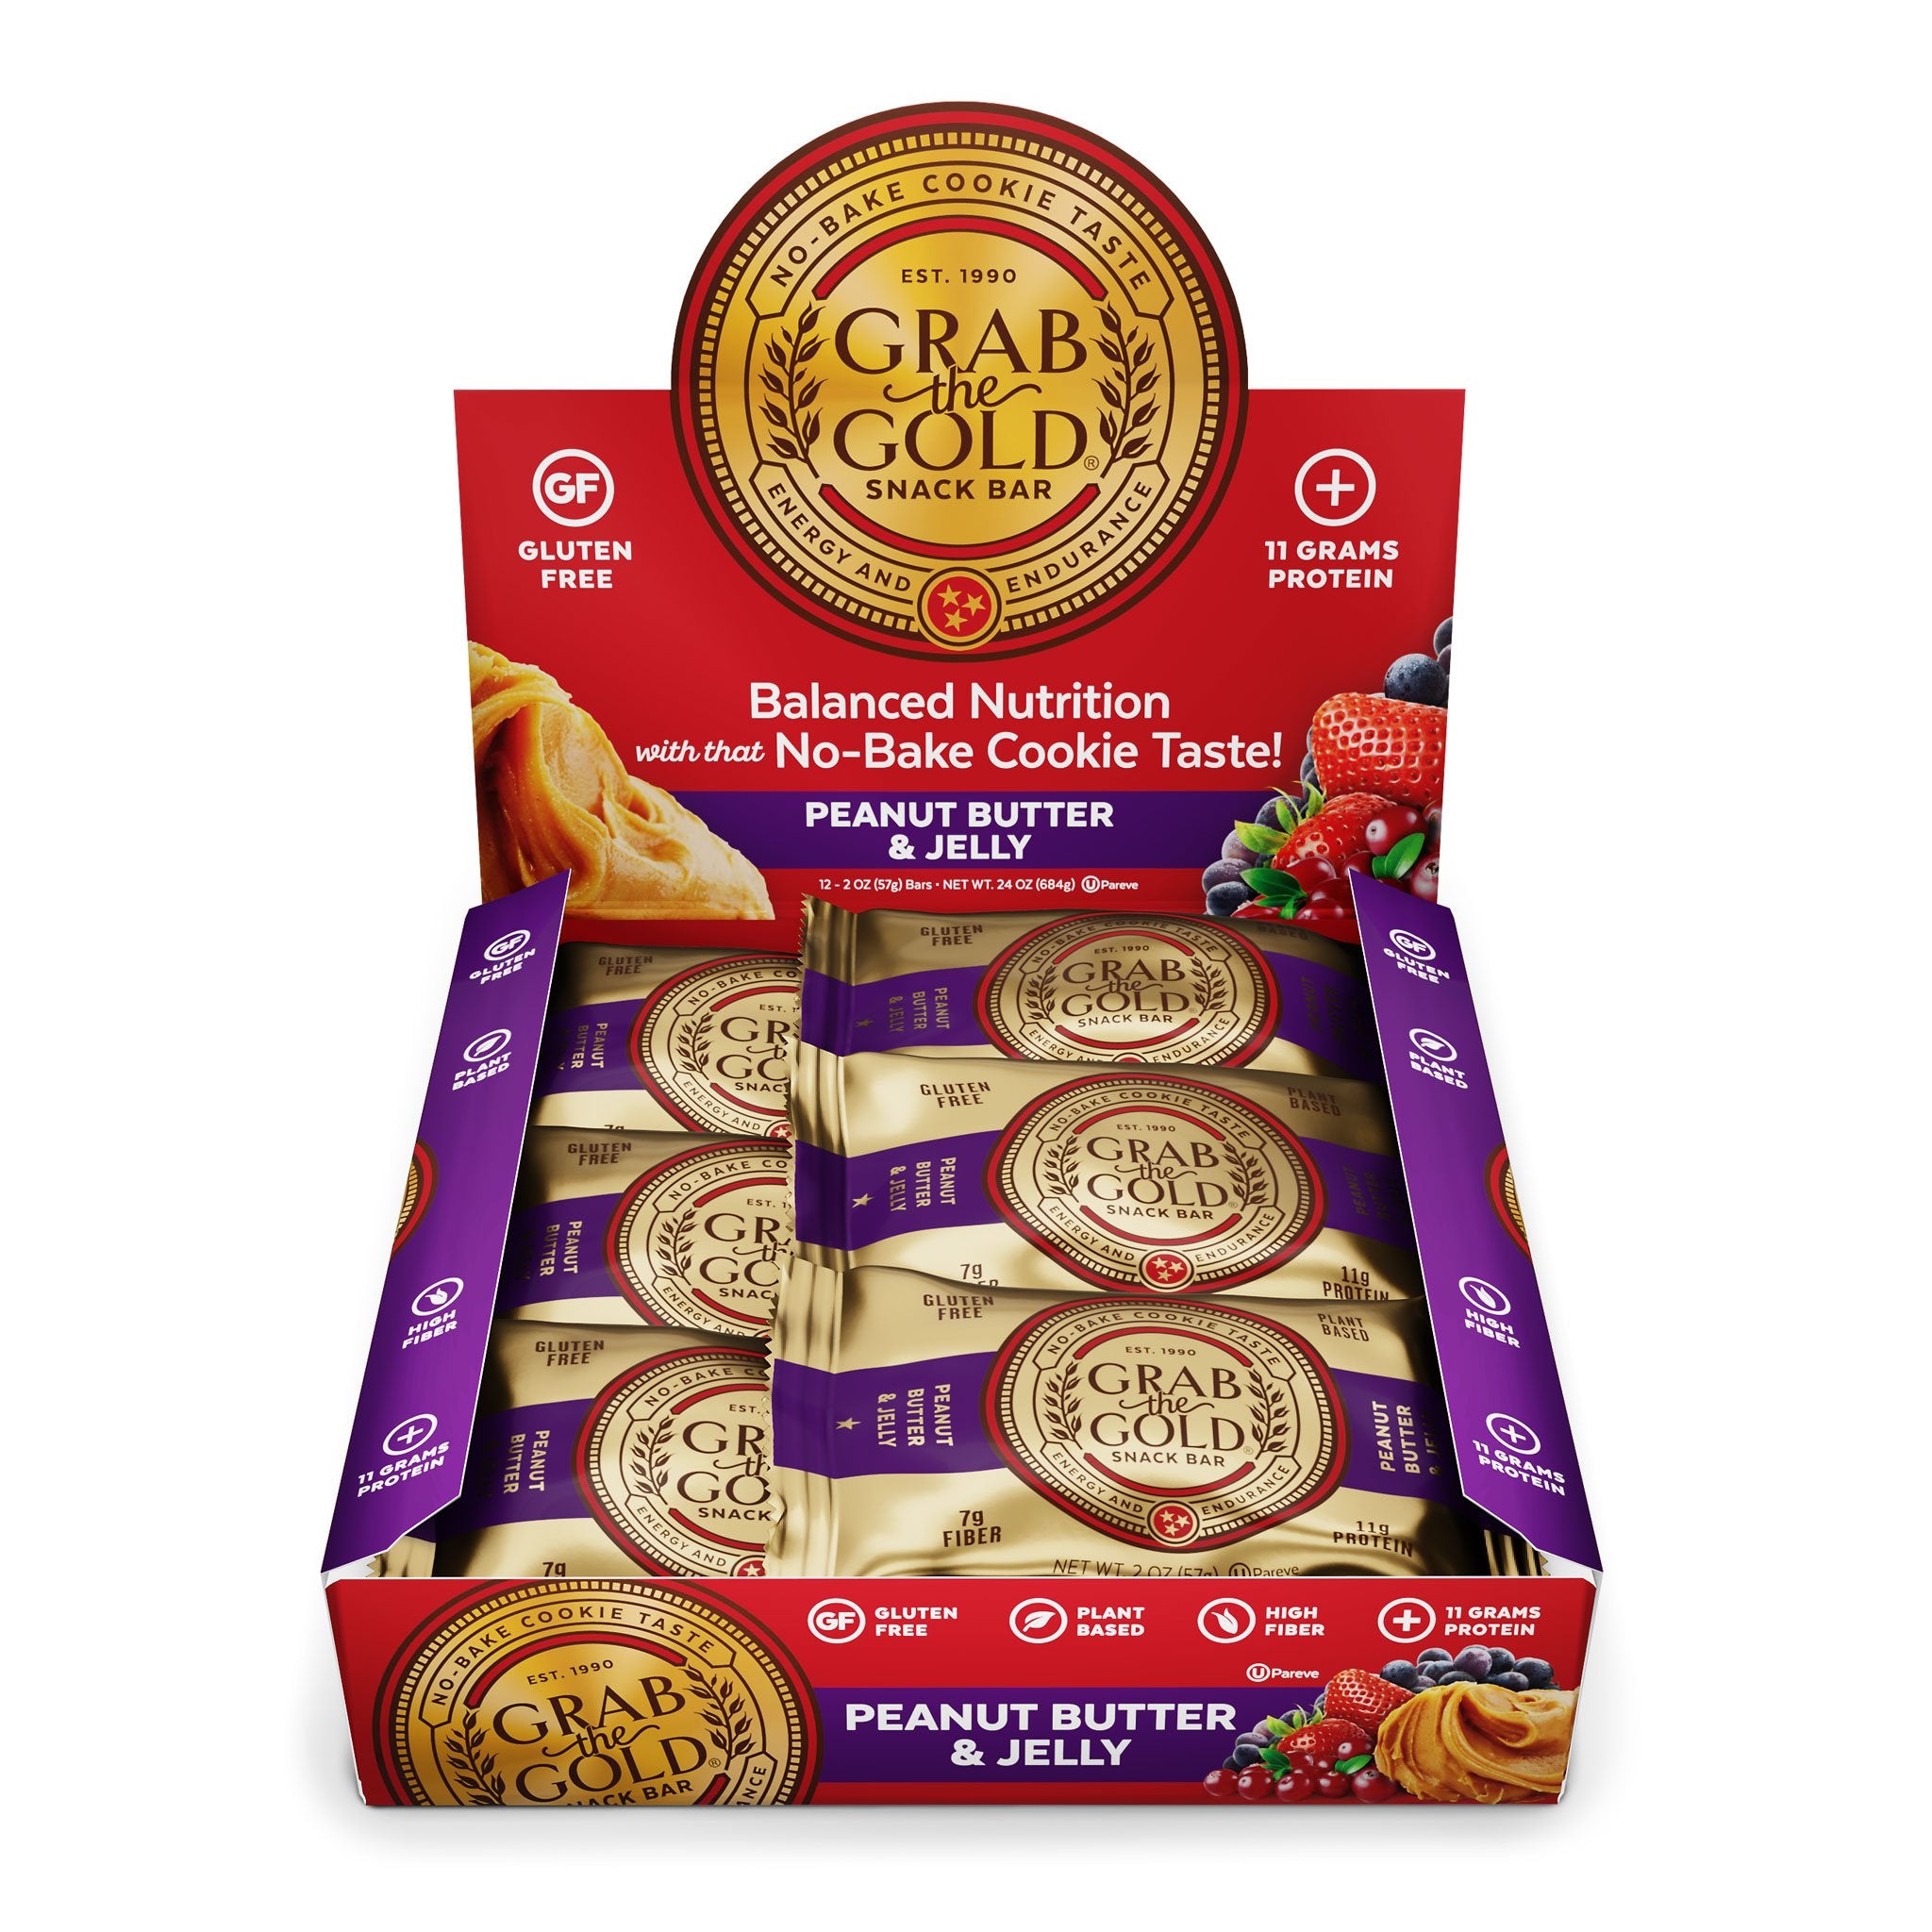 Grab The Gold Peanut Butter & Jelly Snack Bar 12 Bar Box